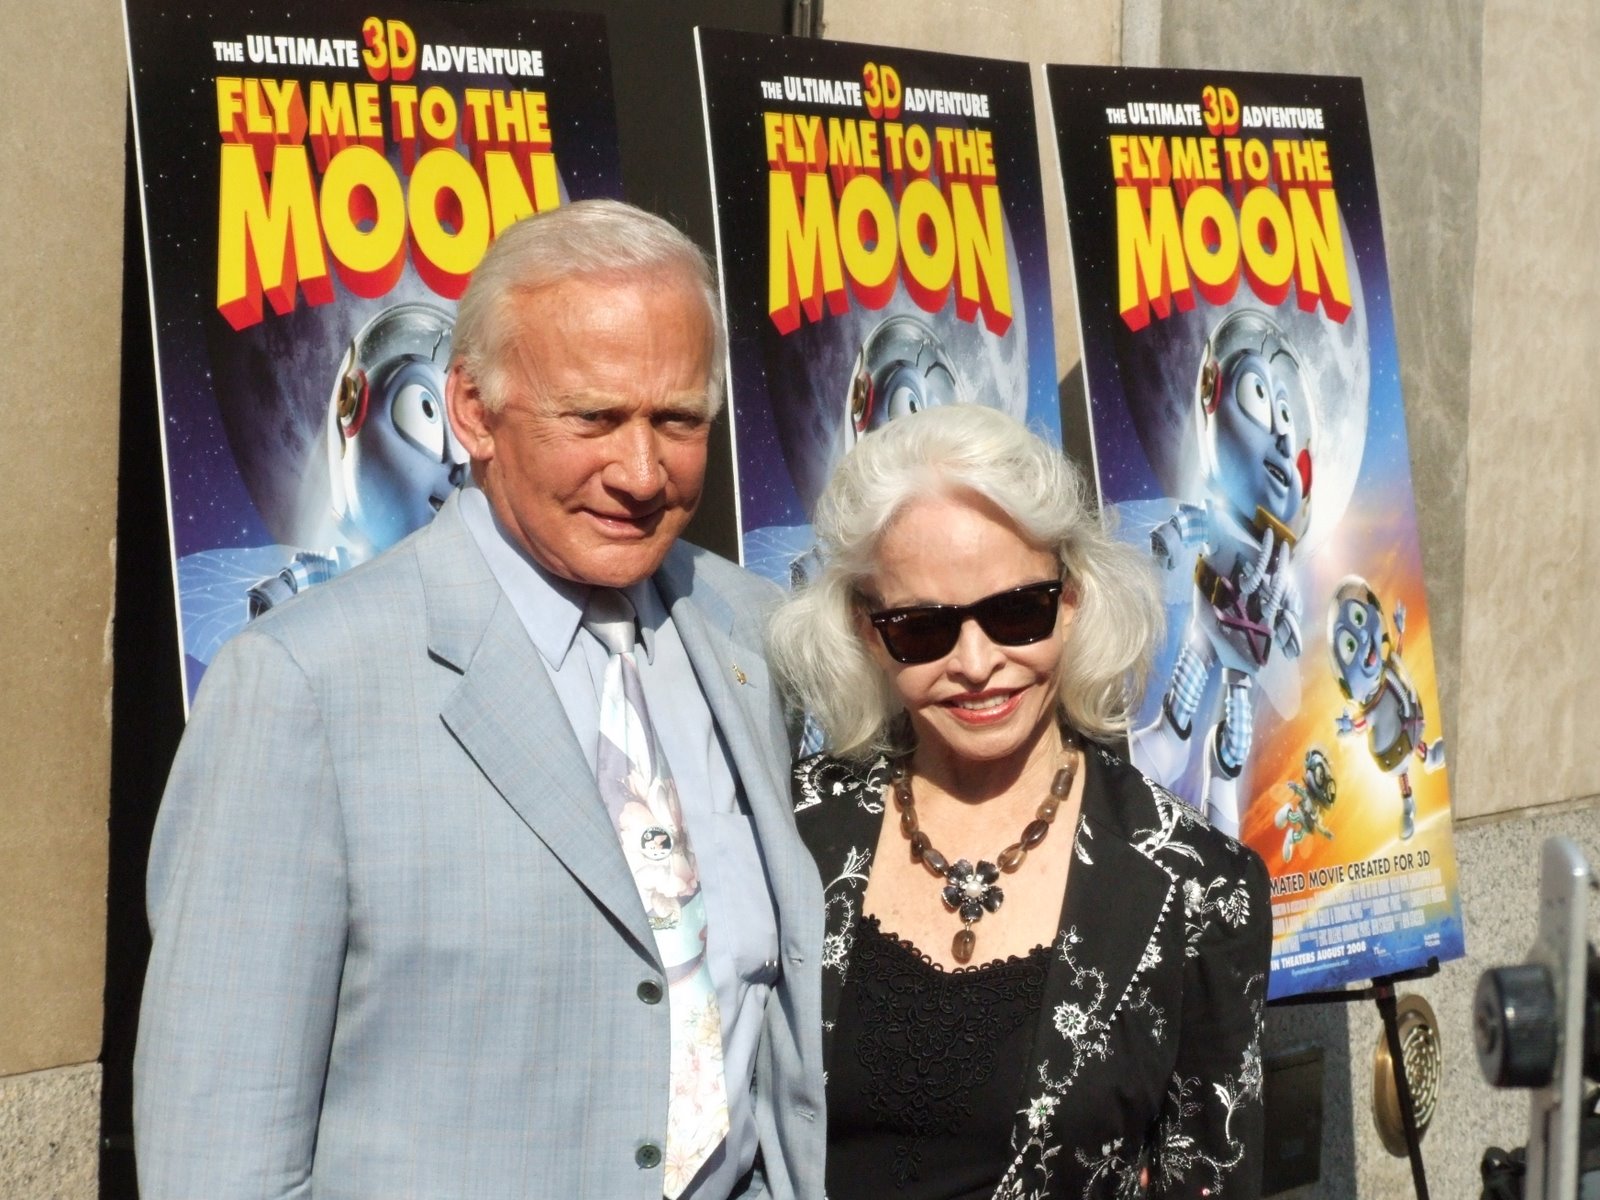 Buzz Aldrin Attended a Special Screening of Fly Me to the Moon @ Regal Union Square